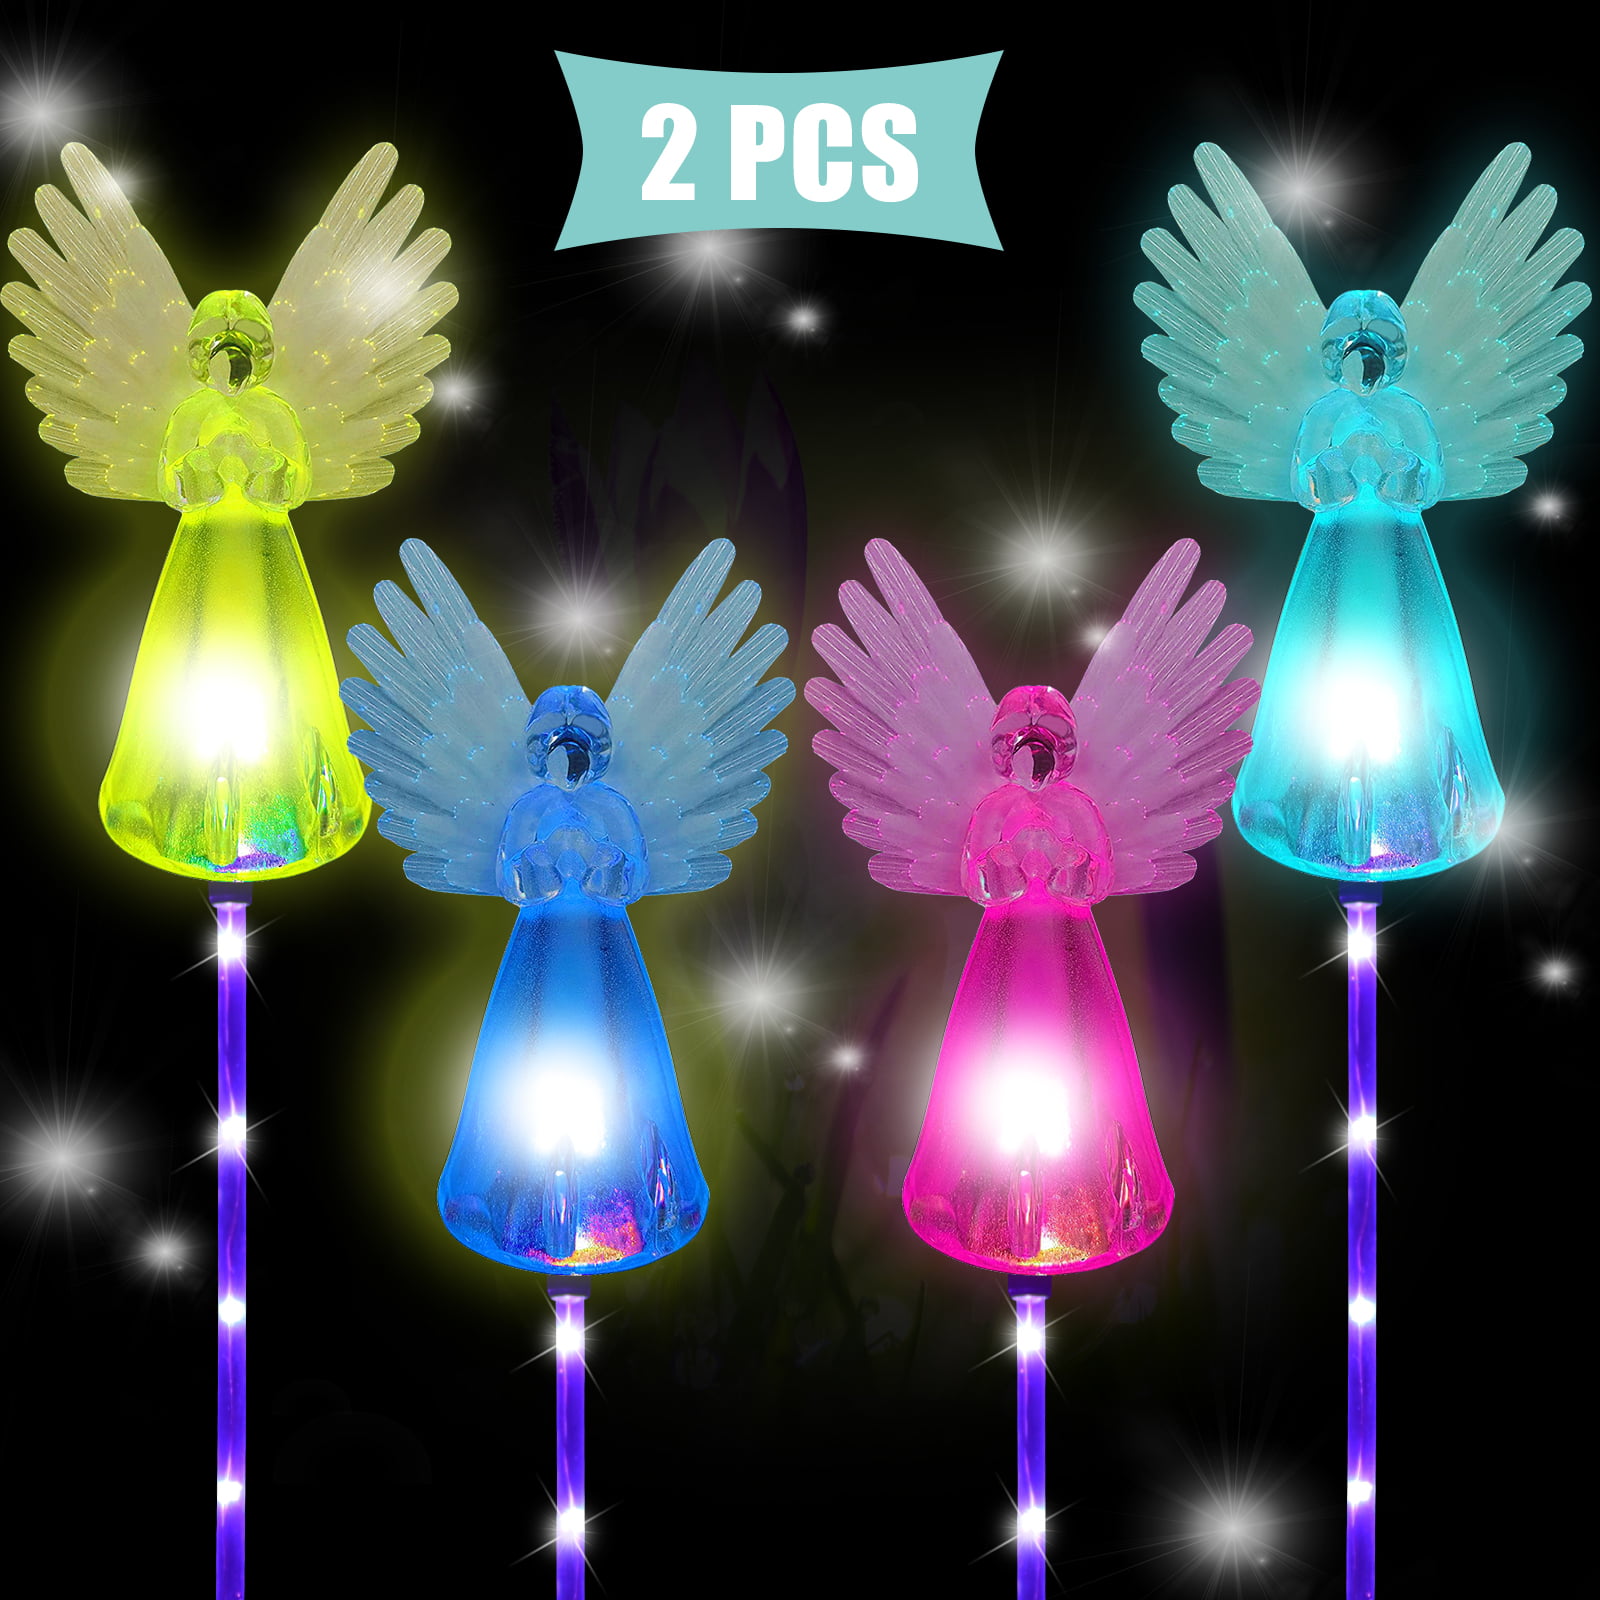 Light Up LED Lanterns Beleive in the power of Angels  Christmas Gift 